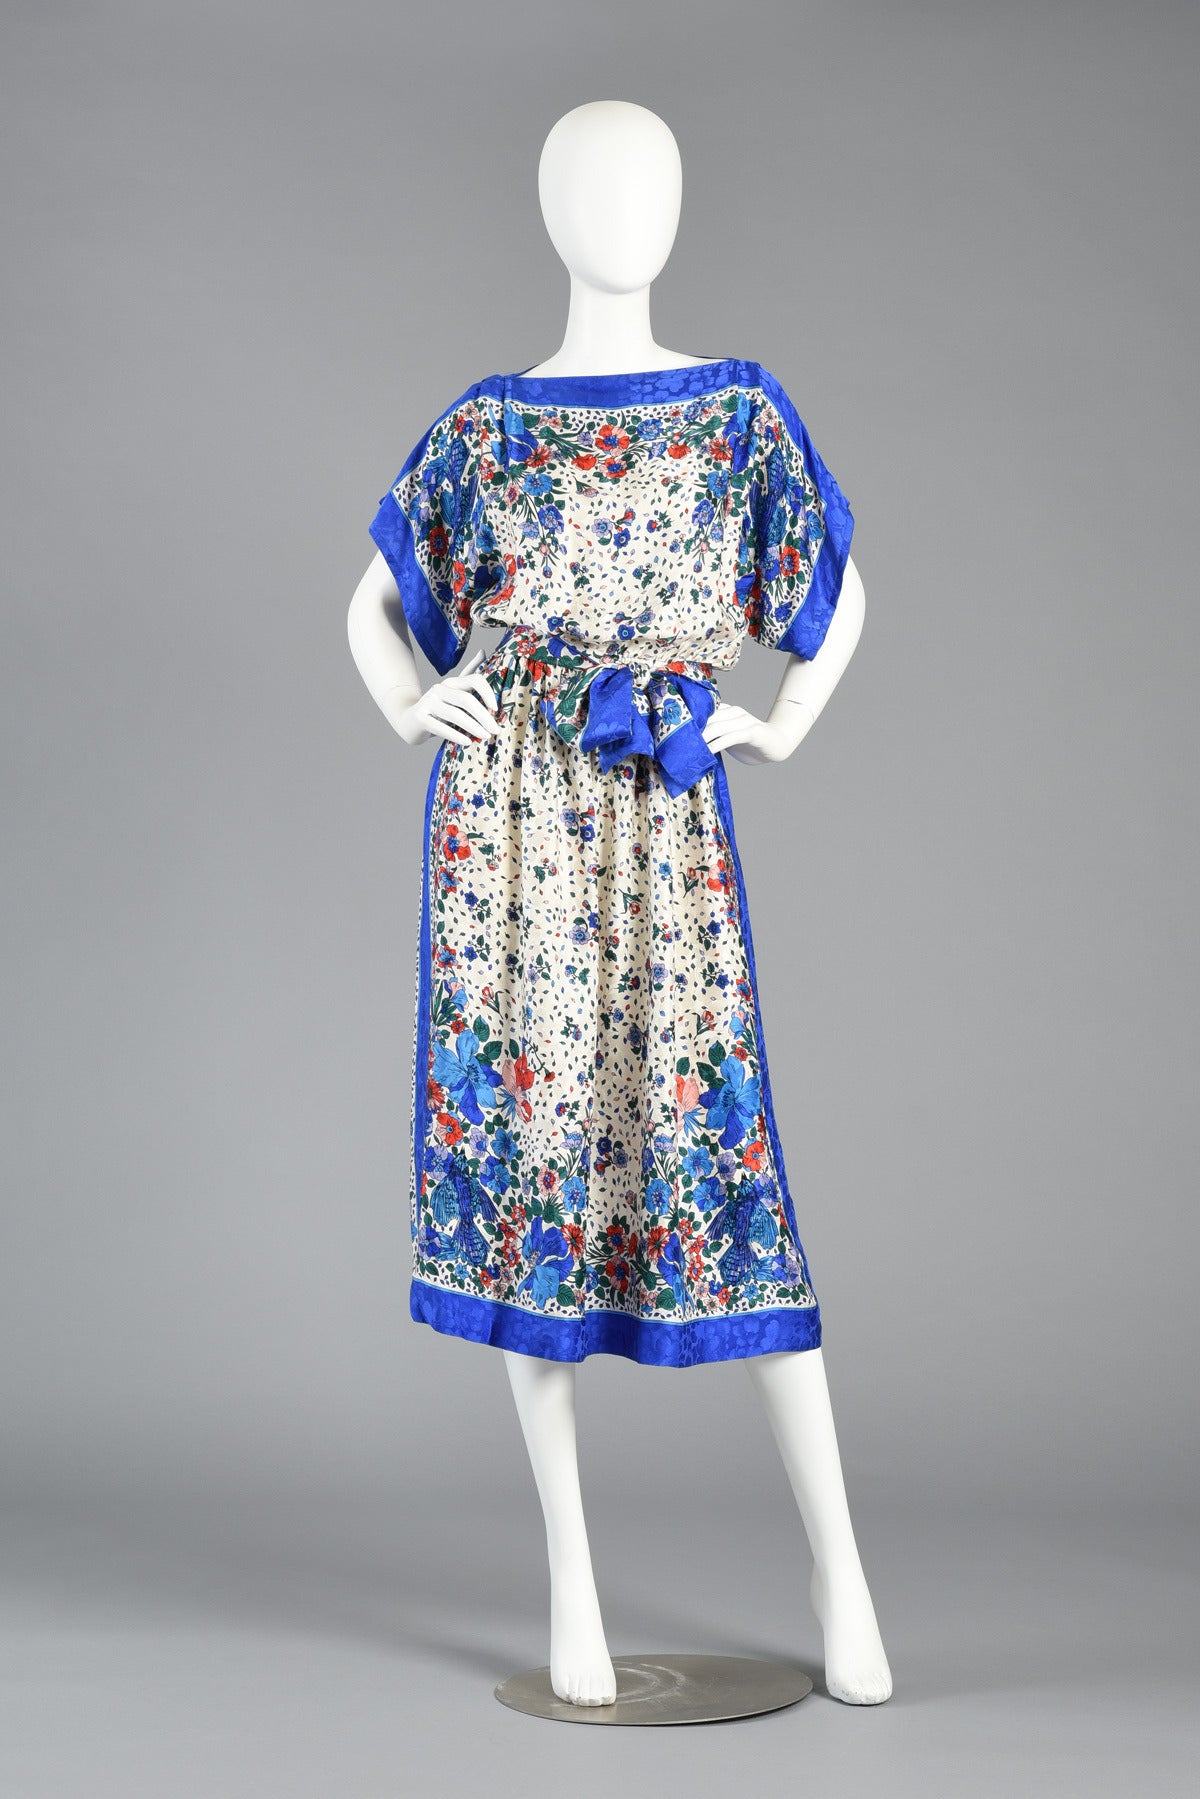 We love this little 1980s silk scarf dress. It's such a happy, cheerful piece and great for most spring and summer events. The perfect dress for a lovely garden party!

Silk dress features a bateau neckline with kimono-esque sleeves, and cinched